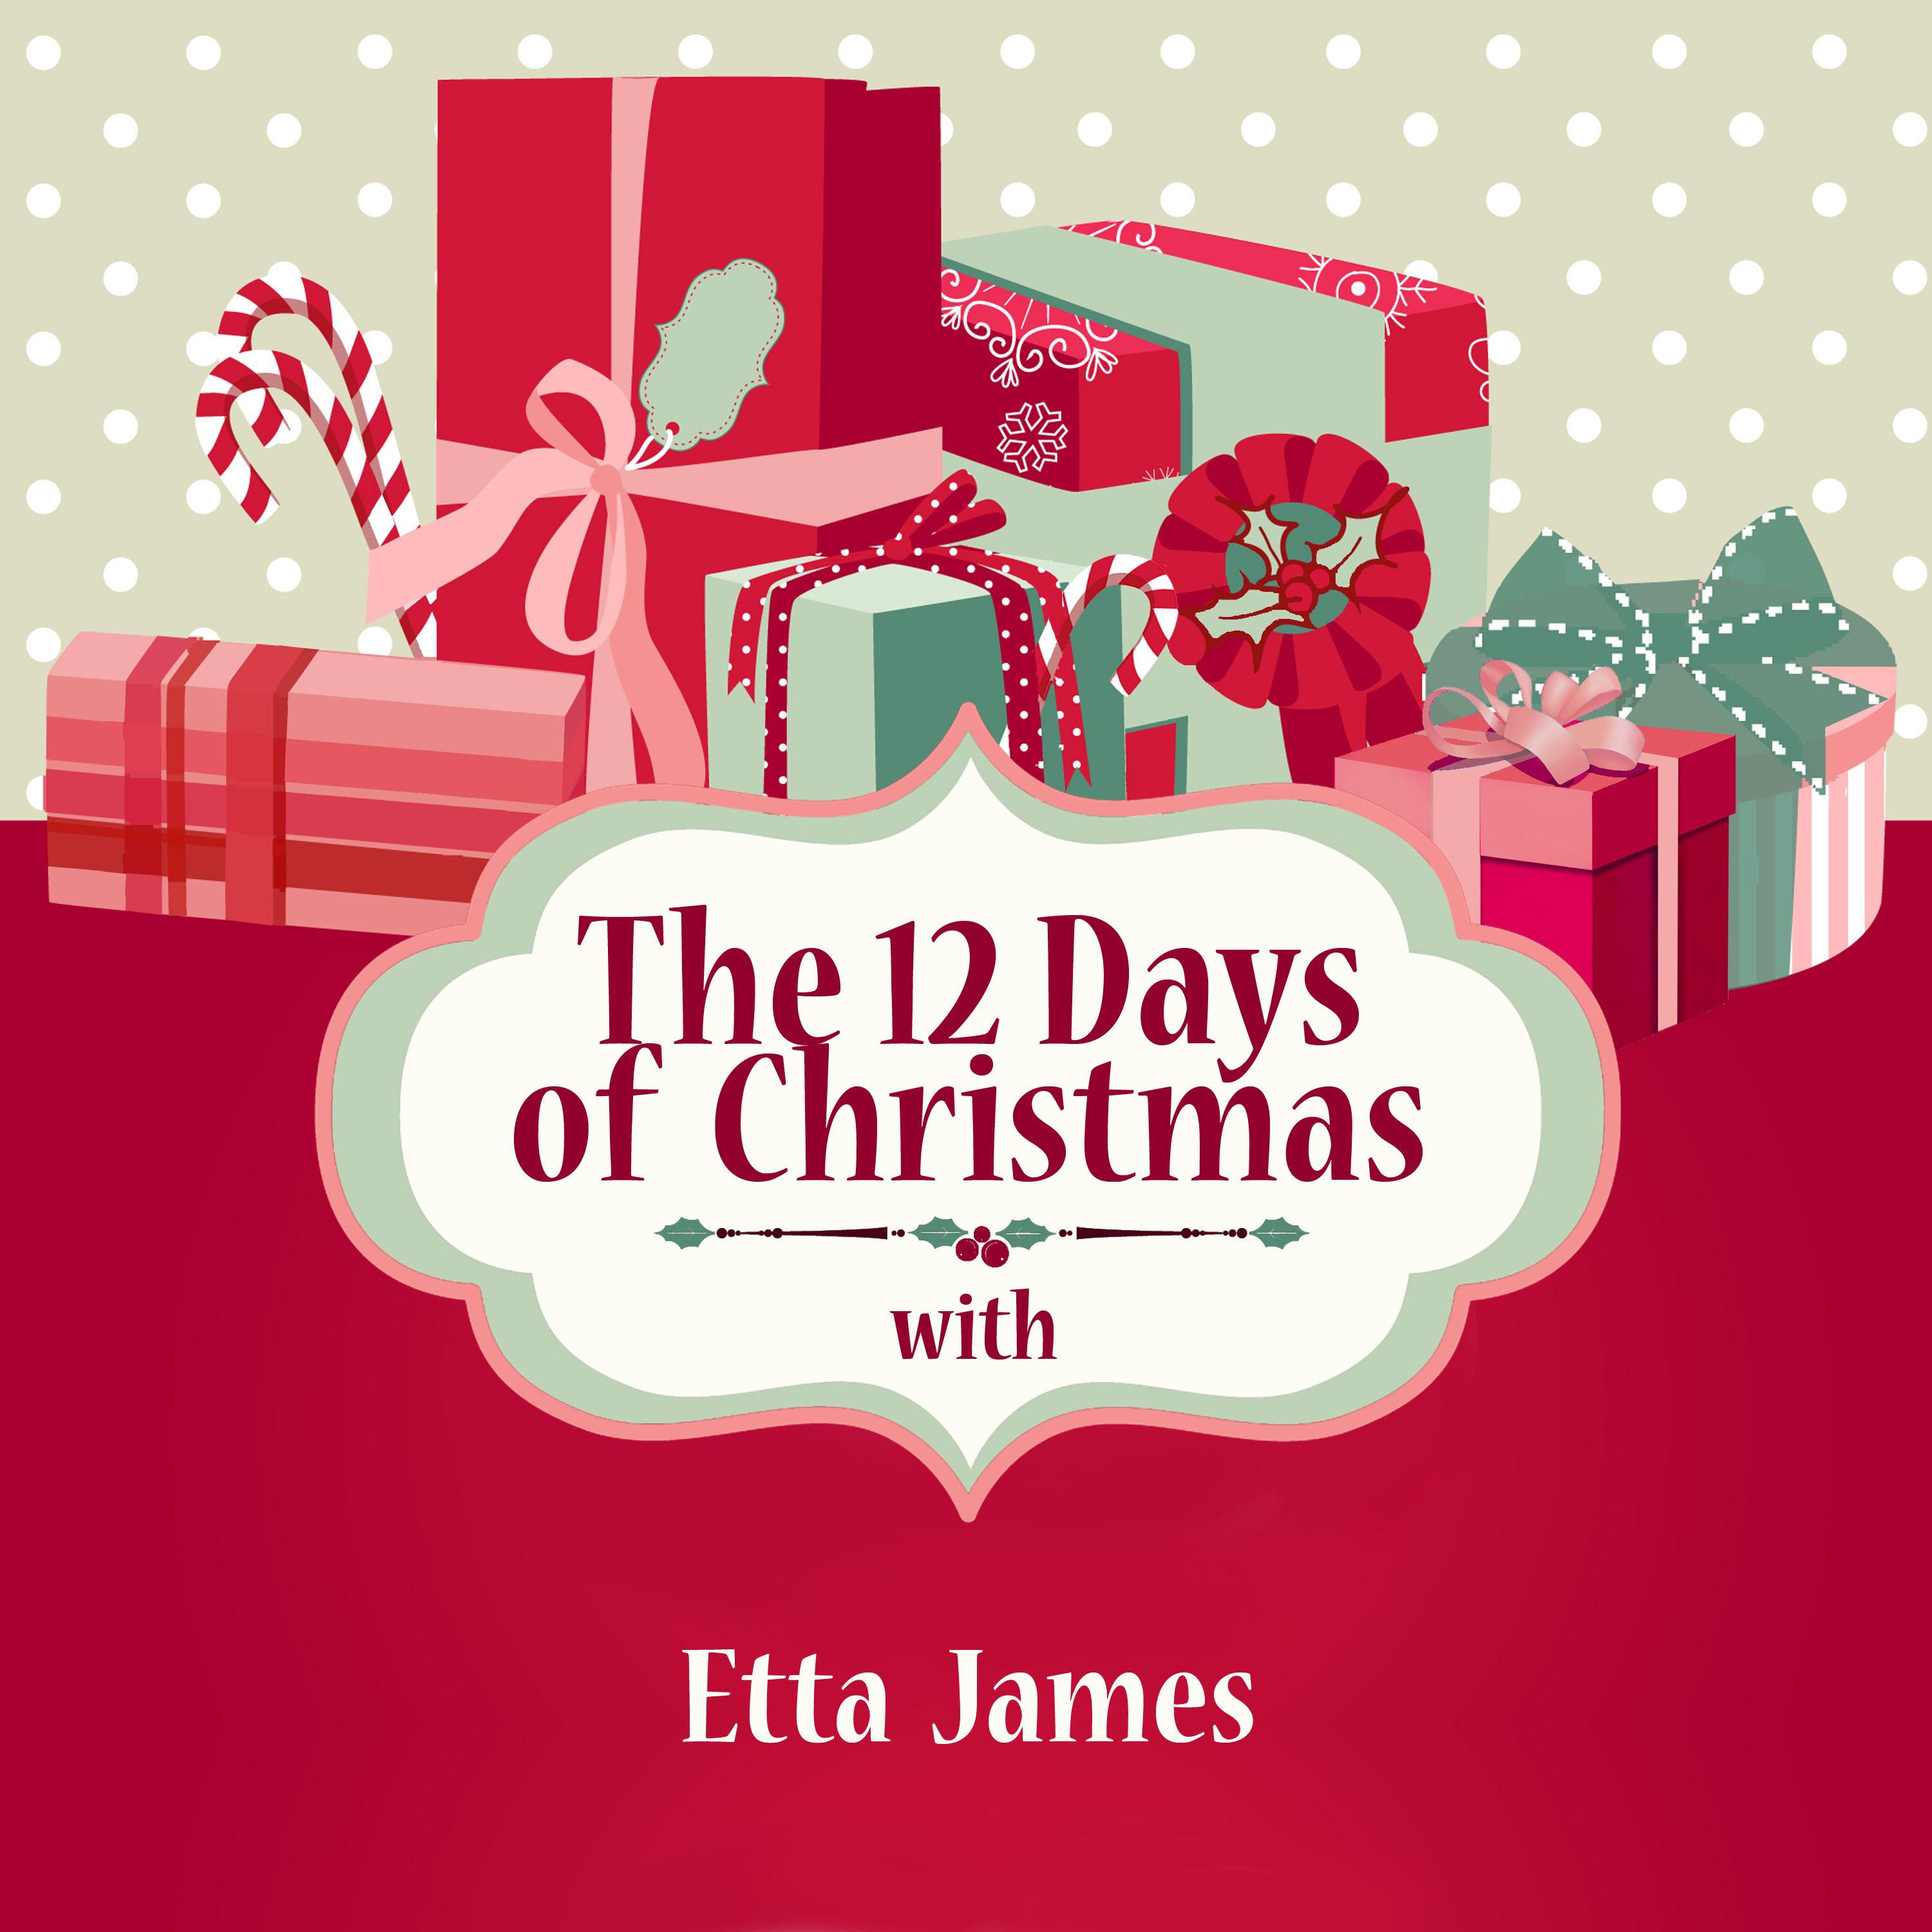 The 12 Days of Christmas with Etta James